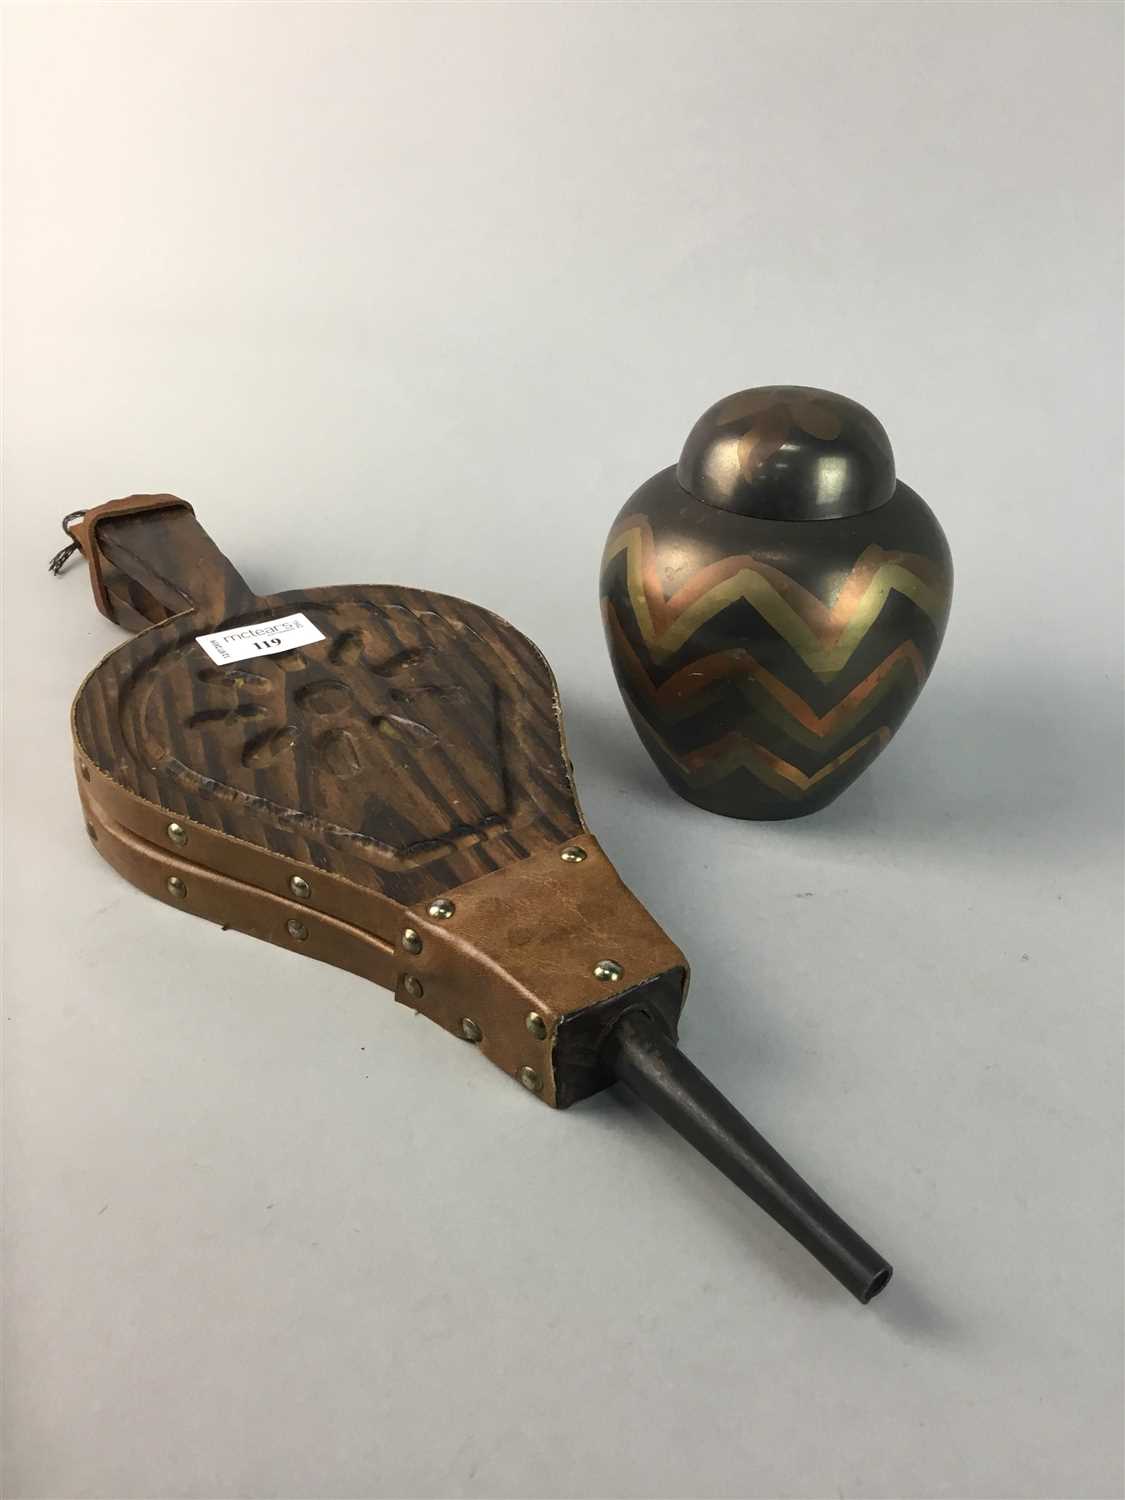 Lot 119 - A LEATHER JEWEL BOX, GINGER JAR, WALL MASK AND A PAIR OF BELLOWS